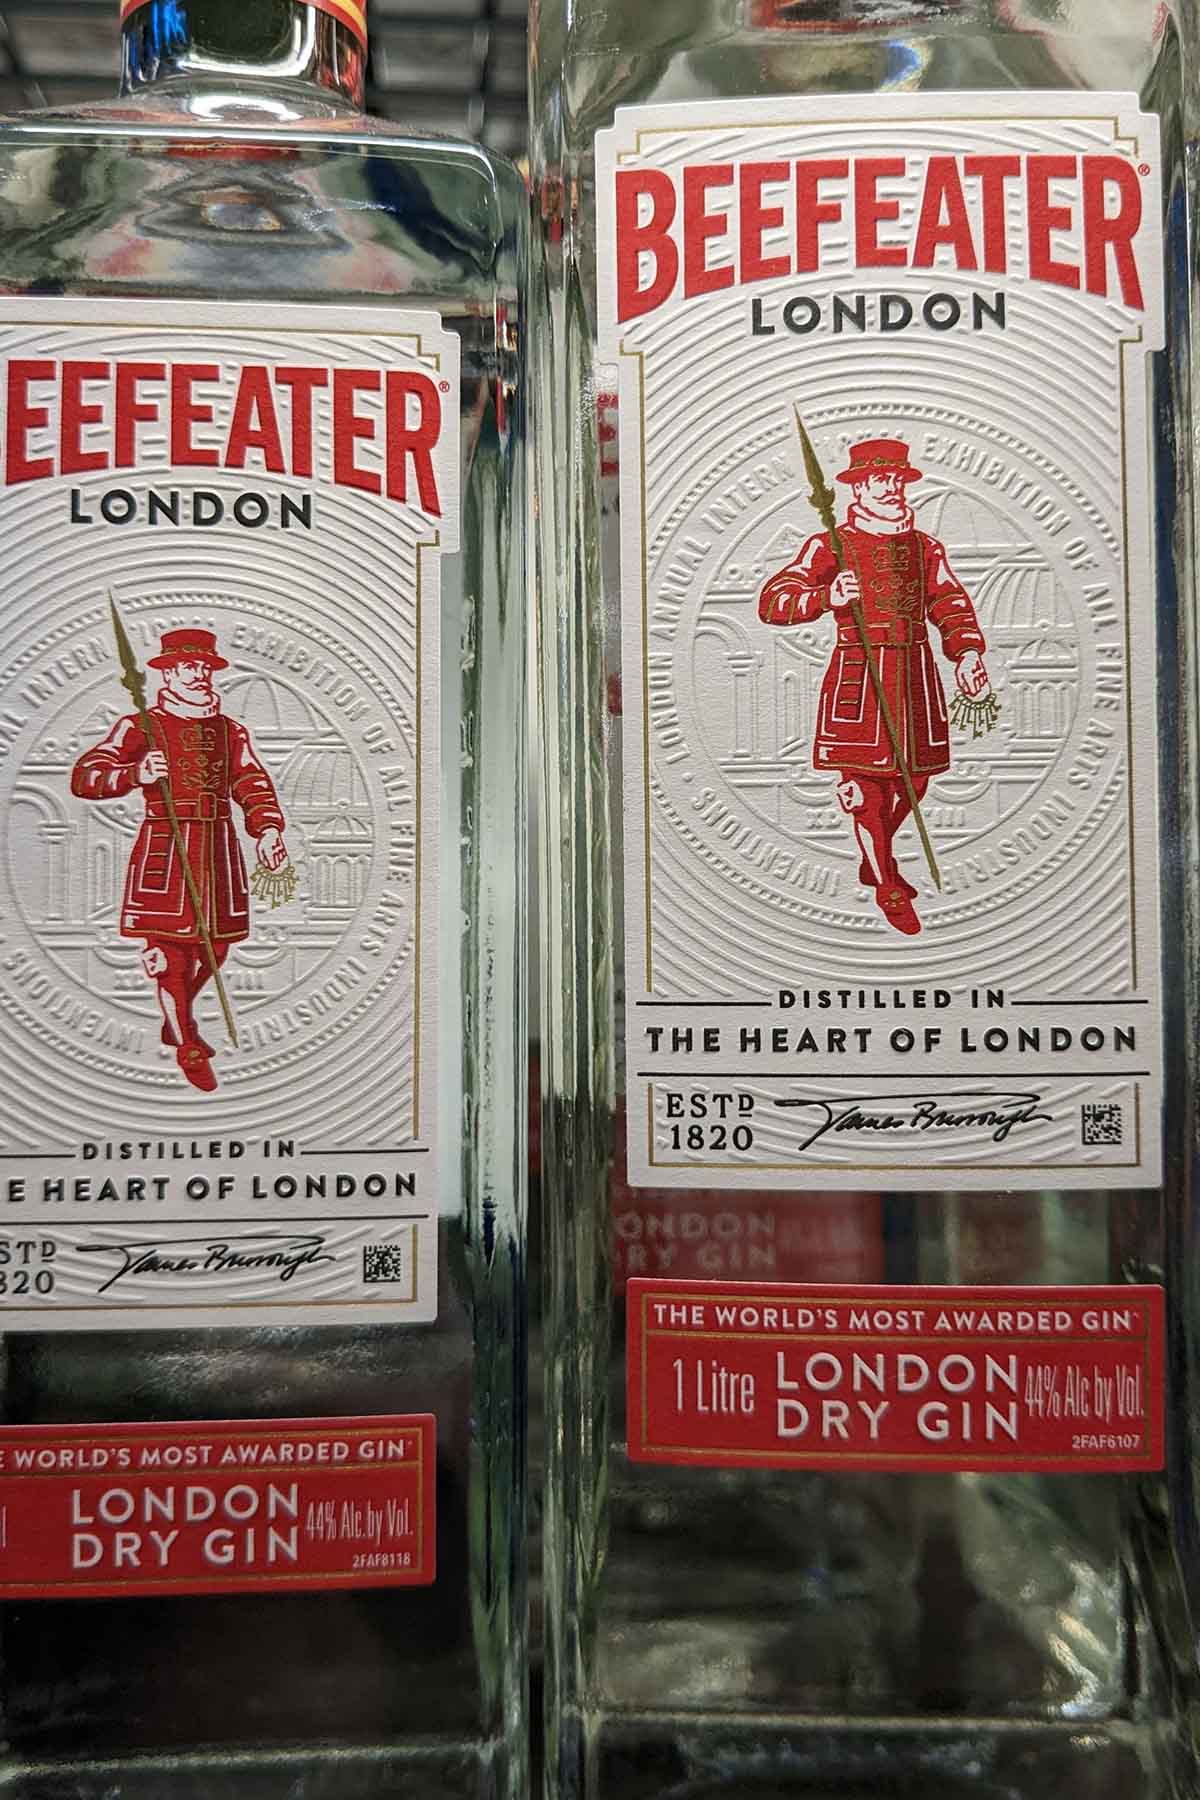 bottle of Beefeater Long dry gin.